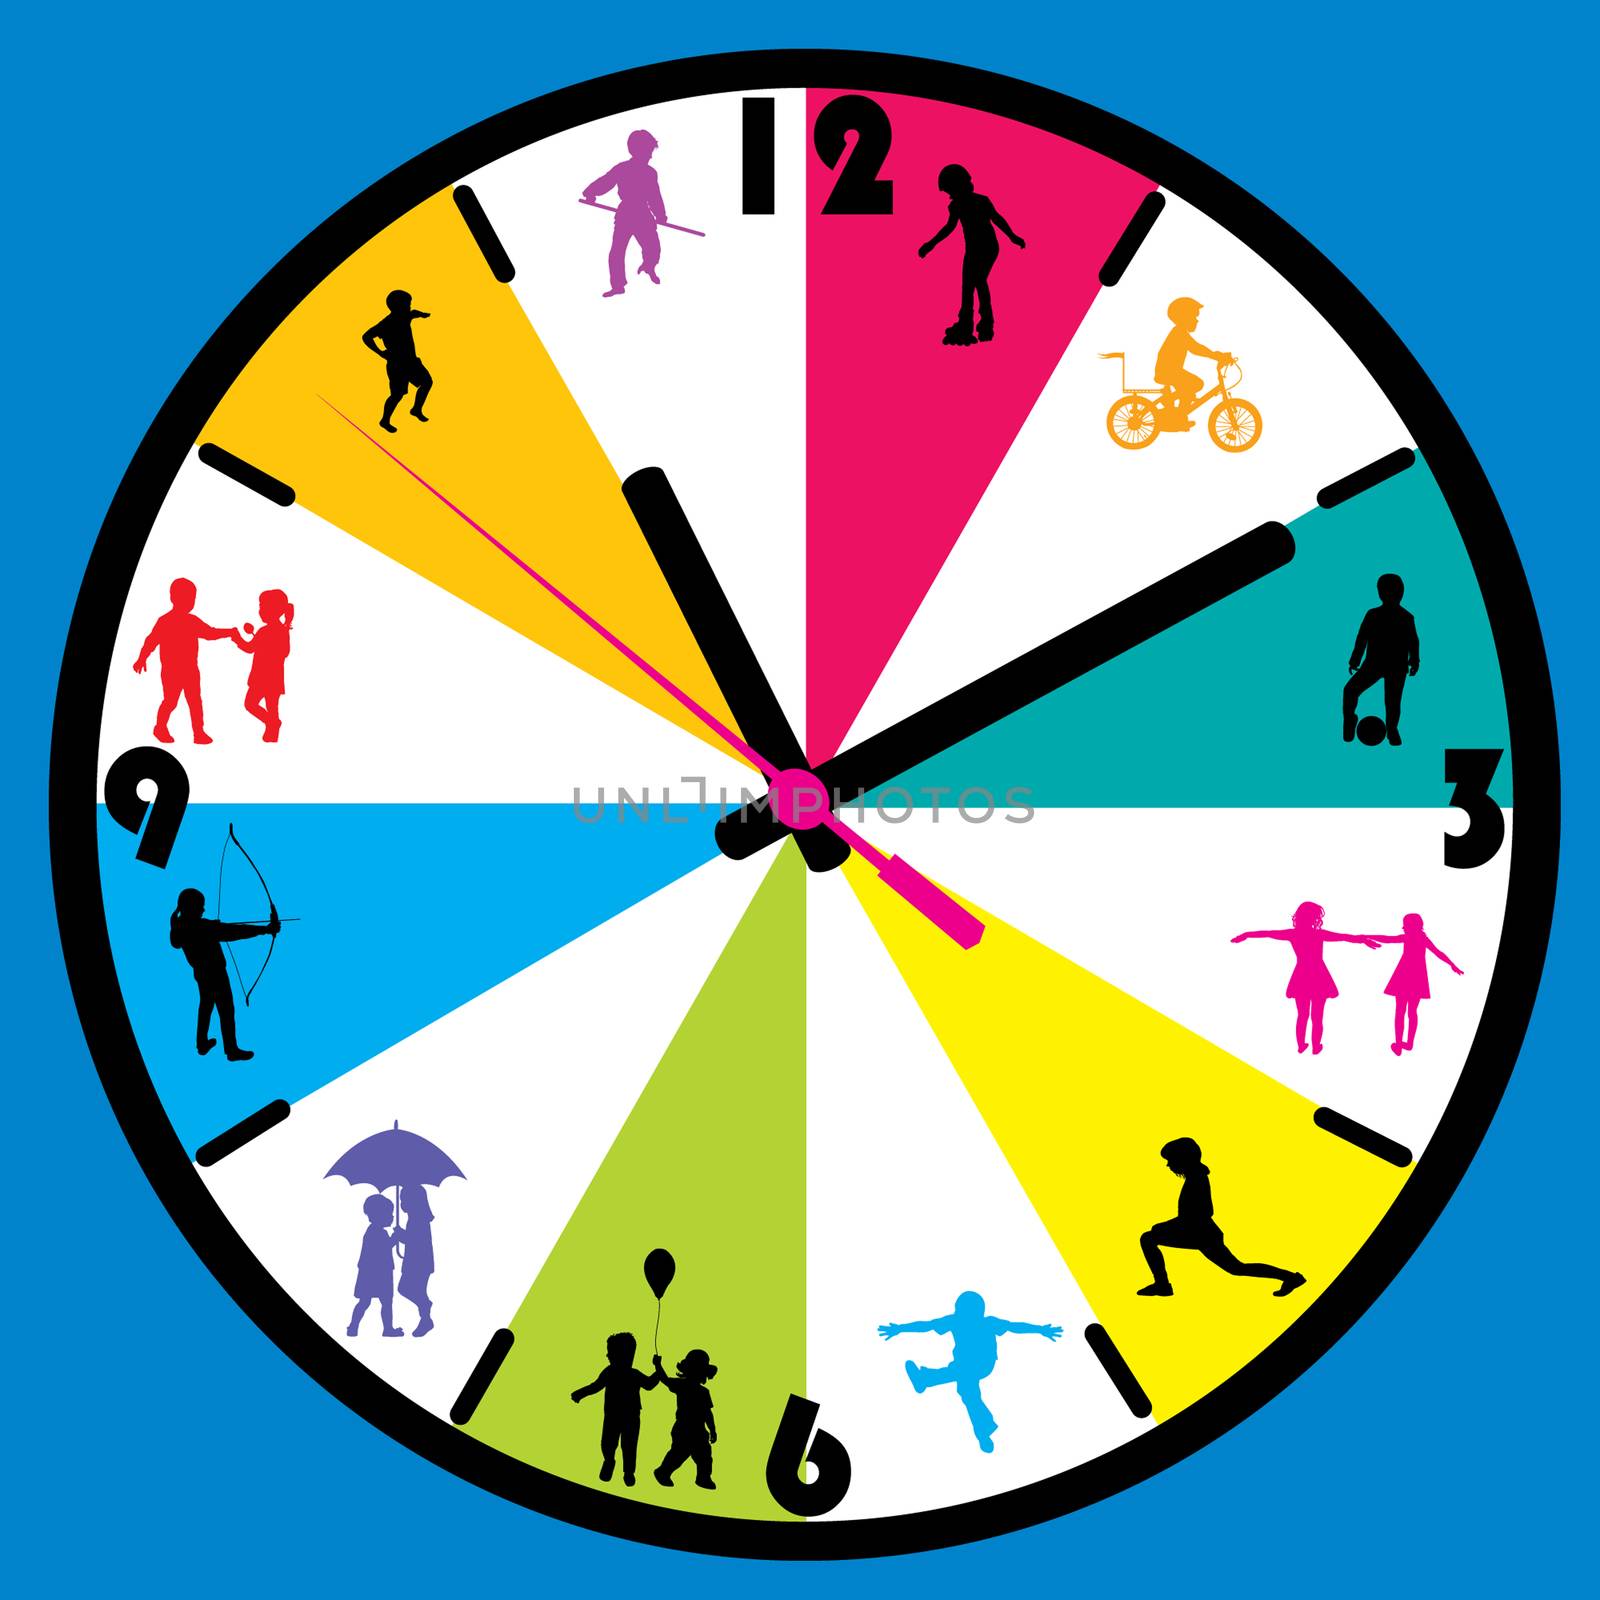 Clock face with children silhouettes by hibrida13